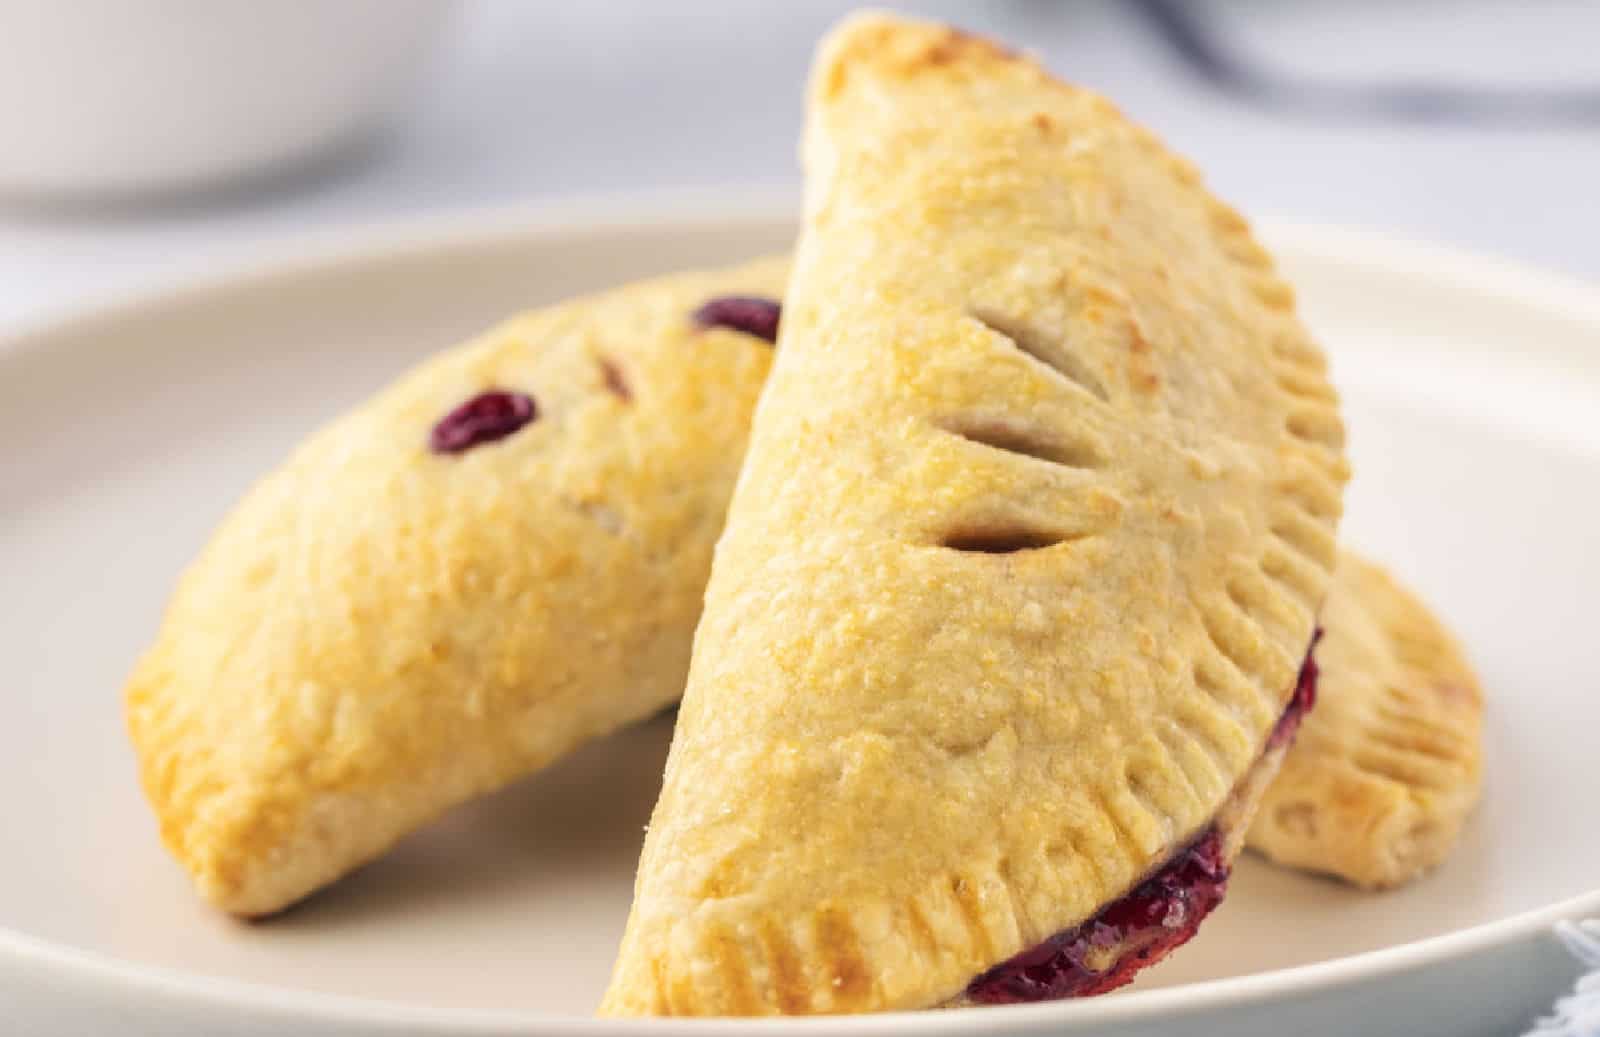 Two cherry handpies on a white plate.